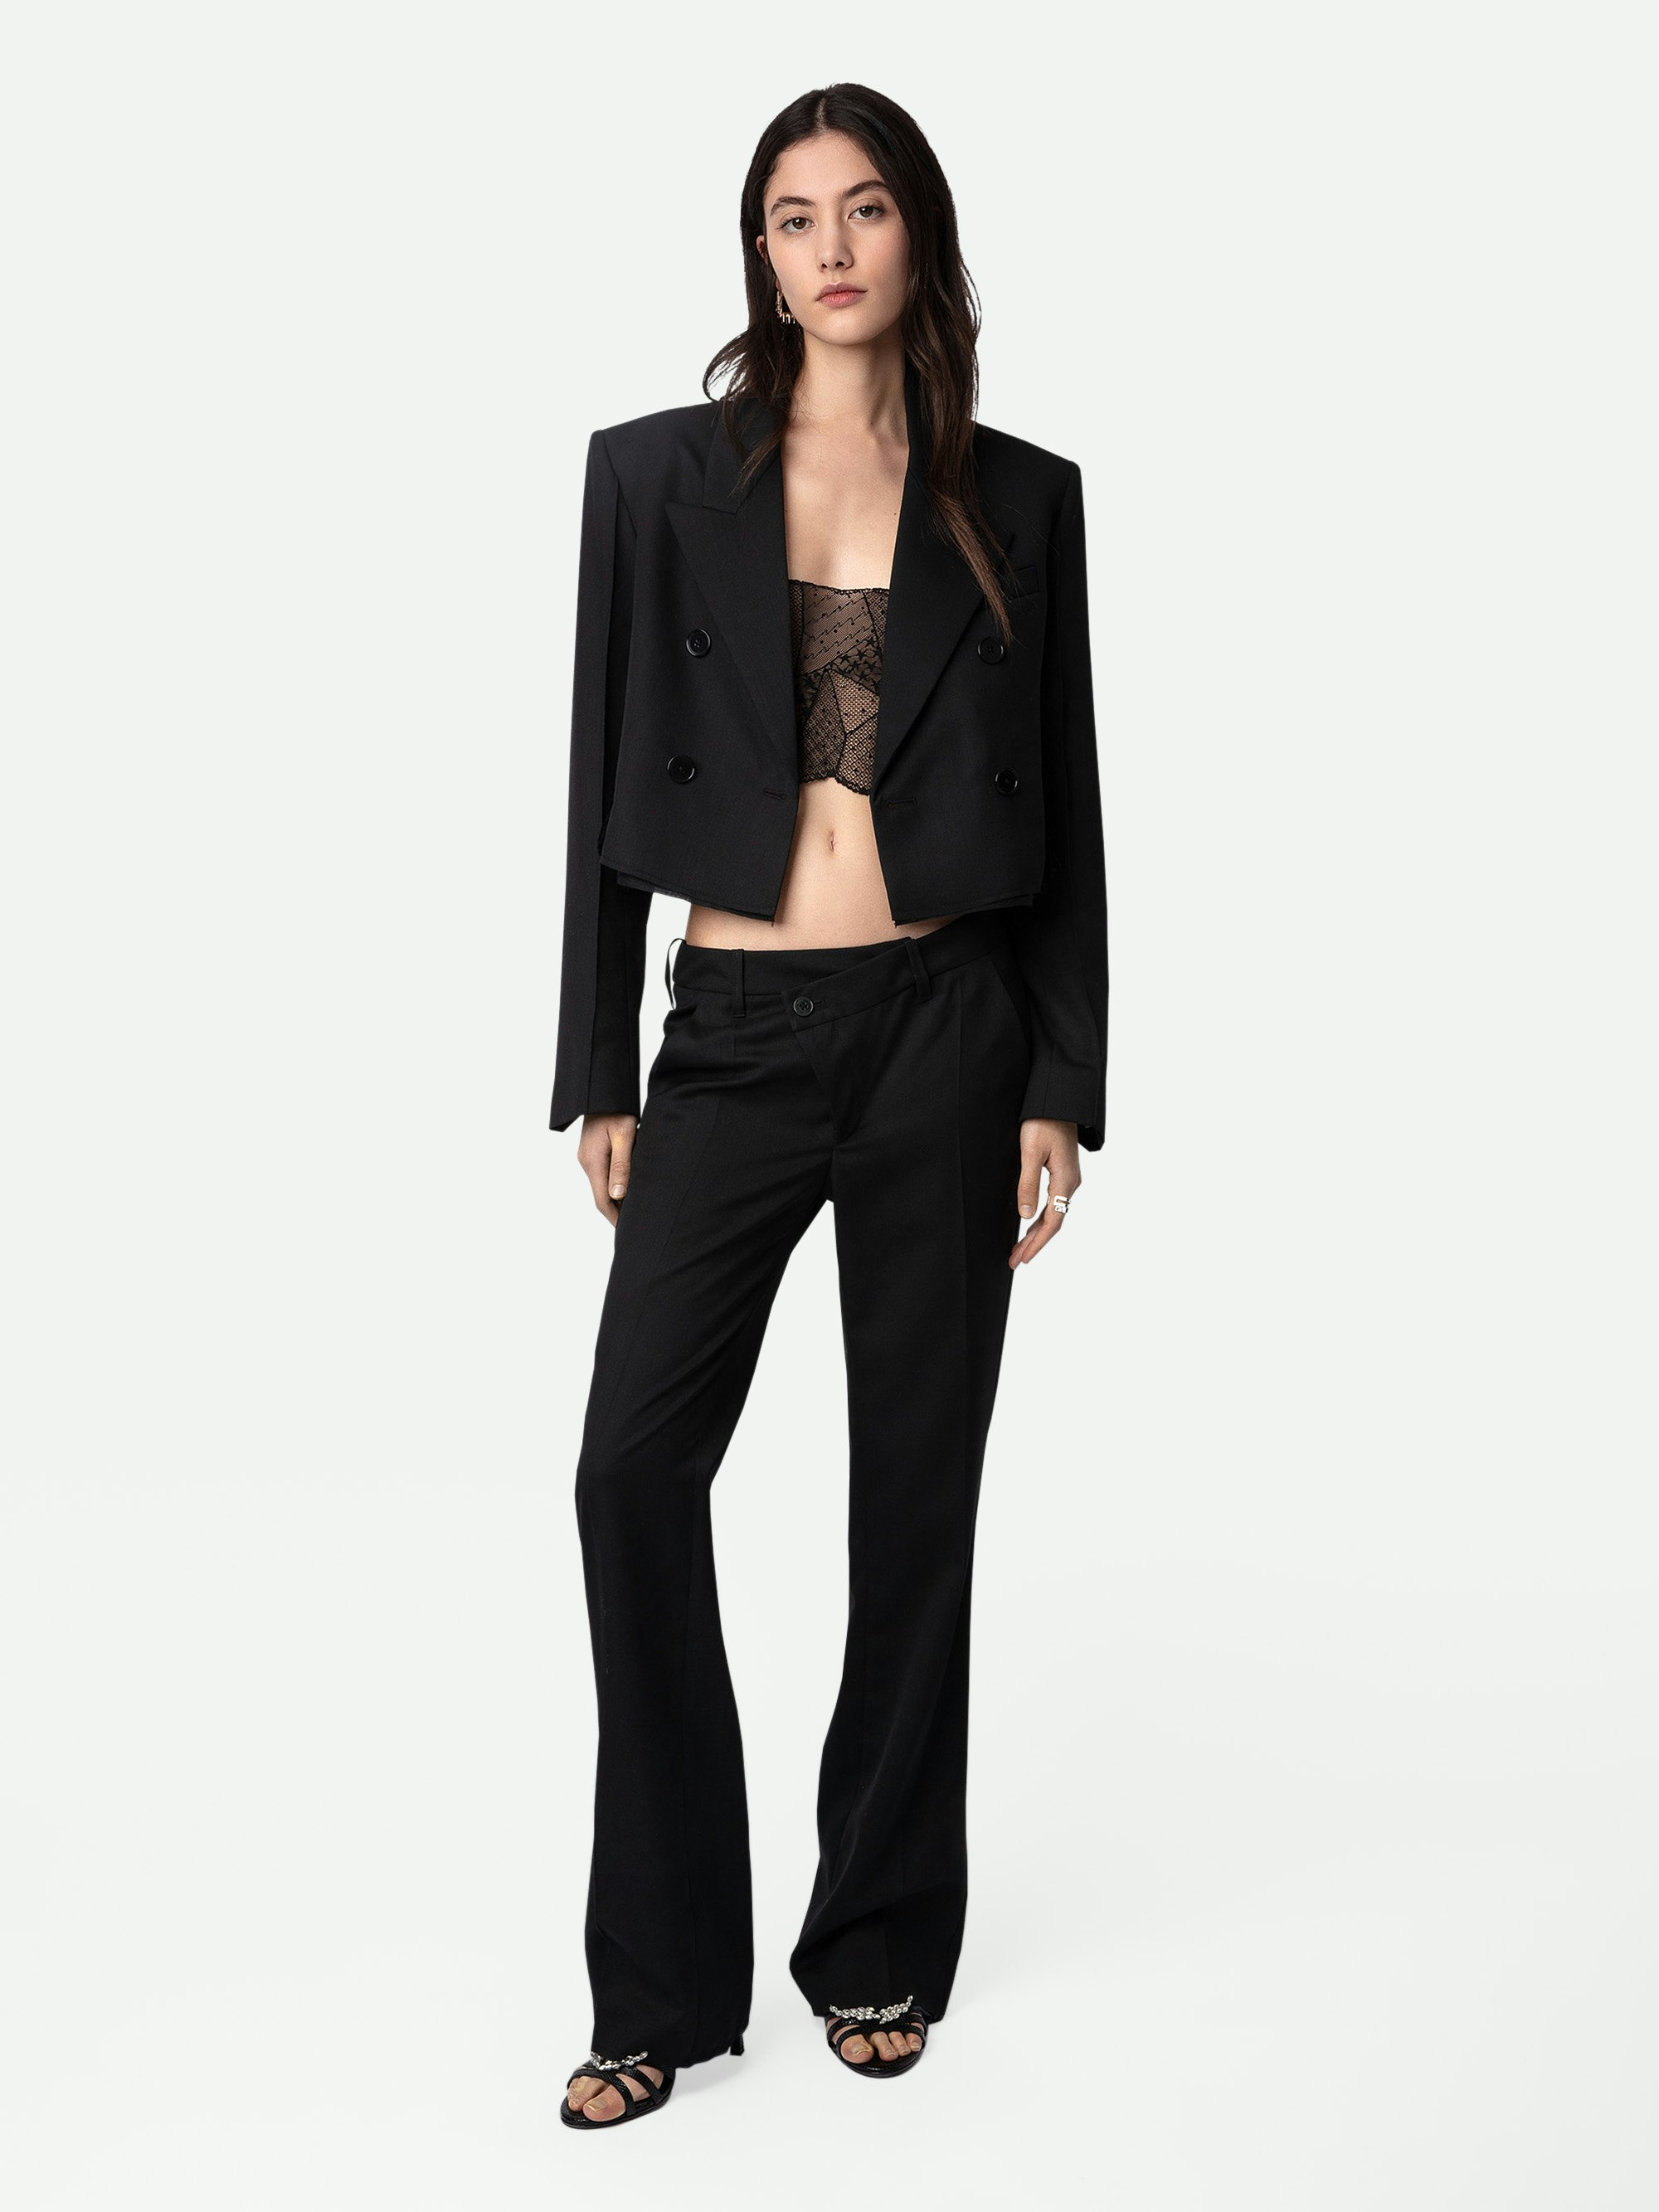 Vito Blazer - Black oversized cropped blazer in black cool wool with button closure and raw edges.